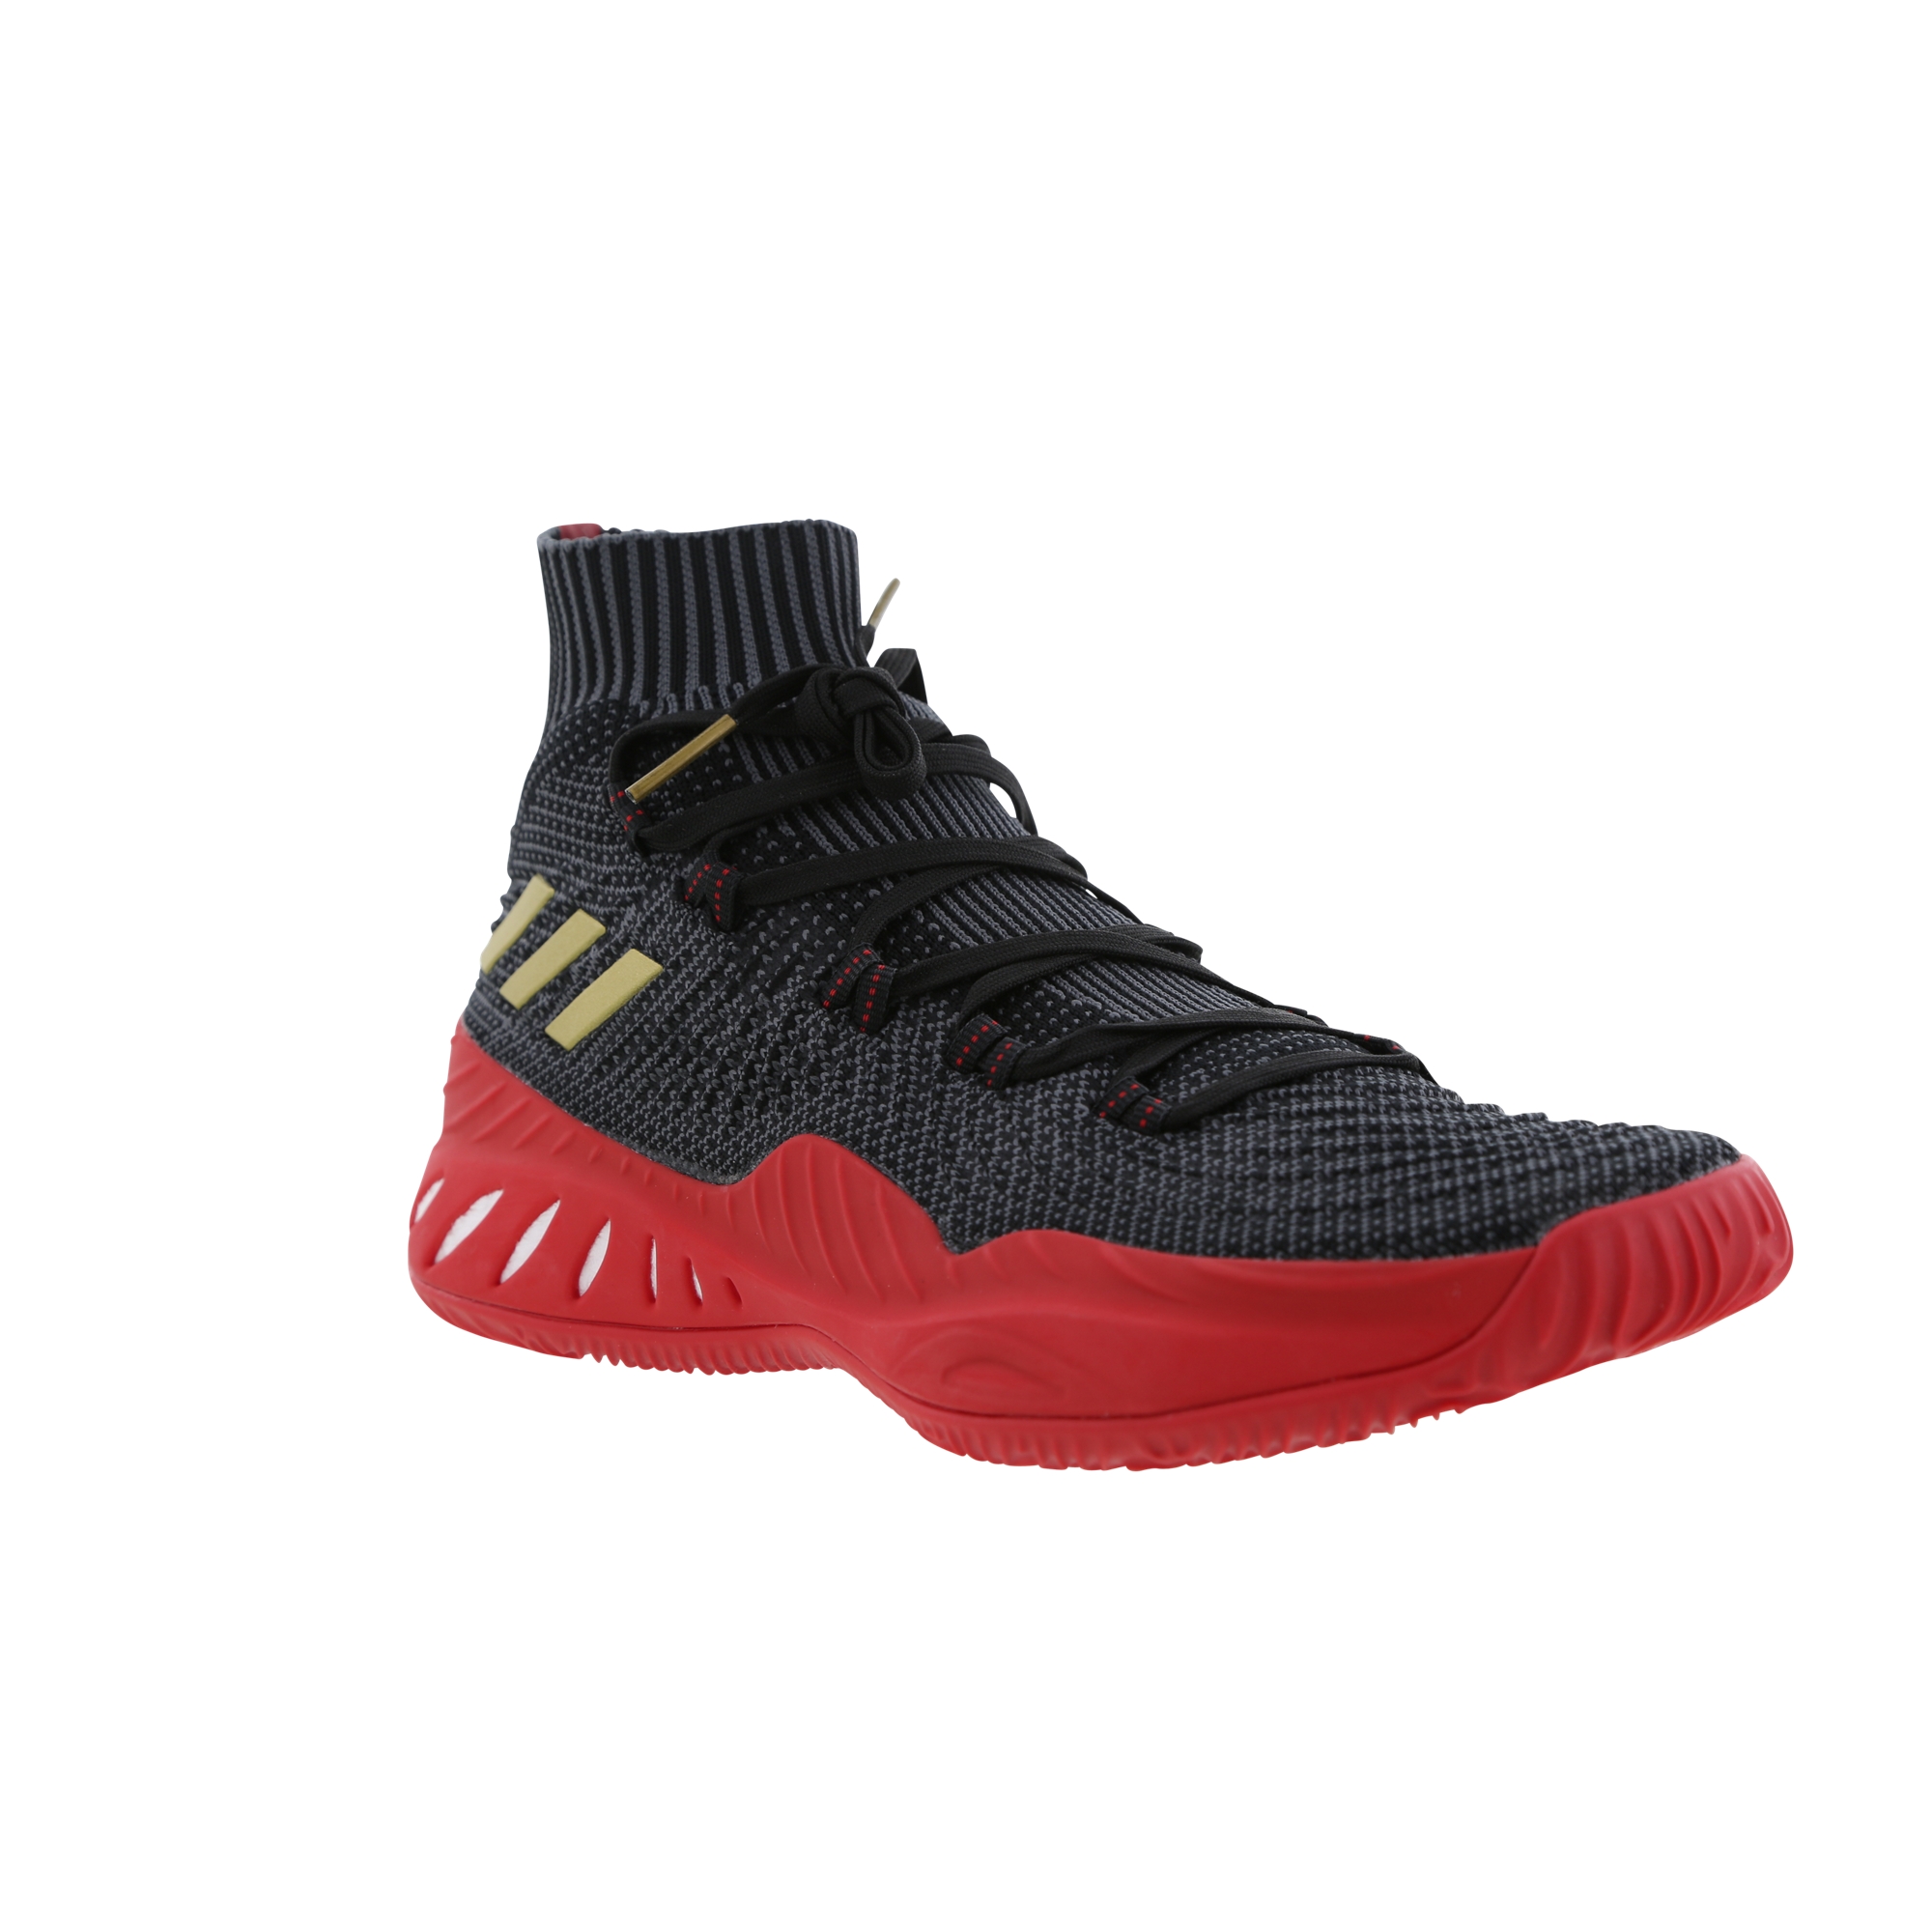 A New adidas Crazy Explosive 2017 PK Colorway (In Case You Missed the